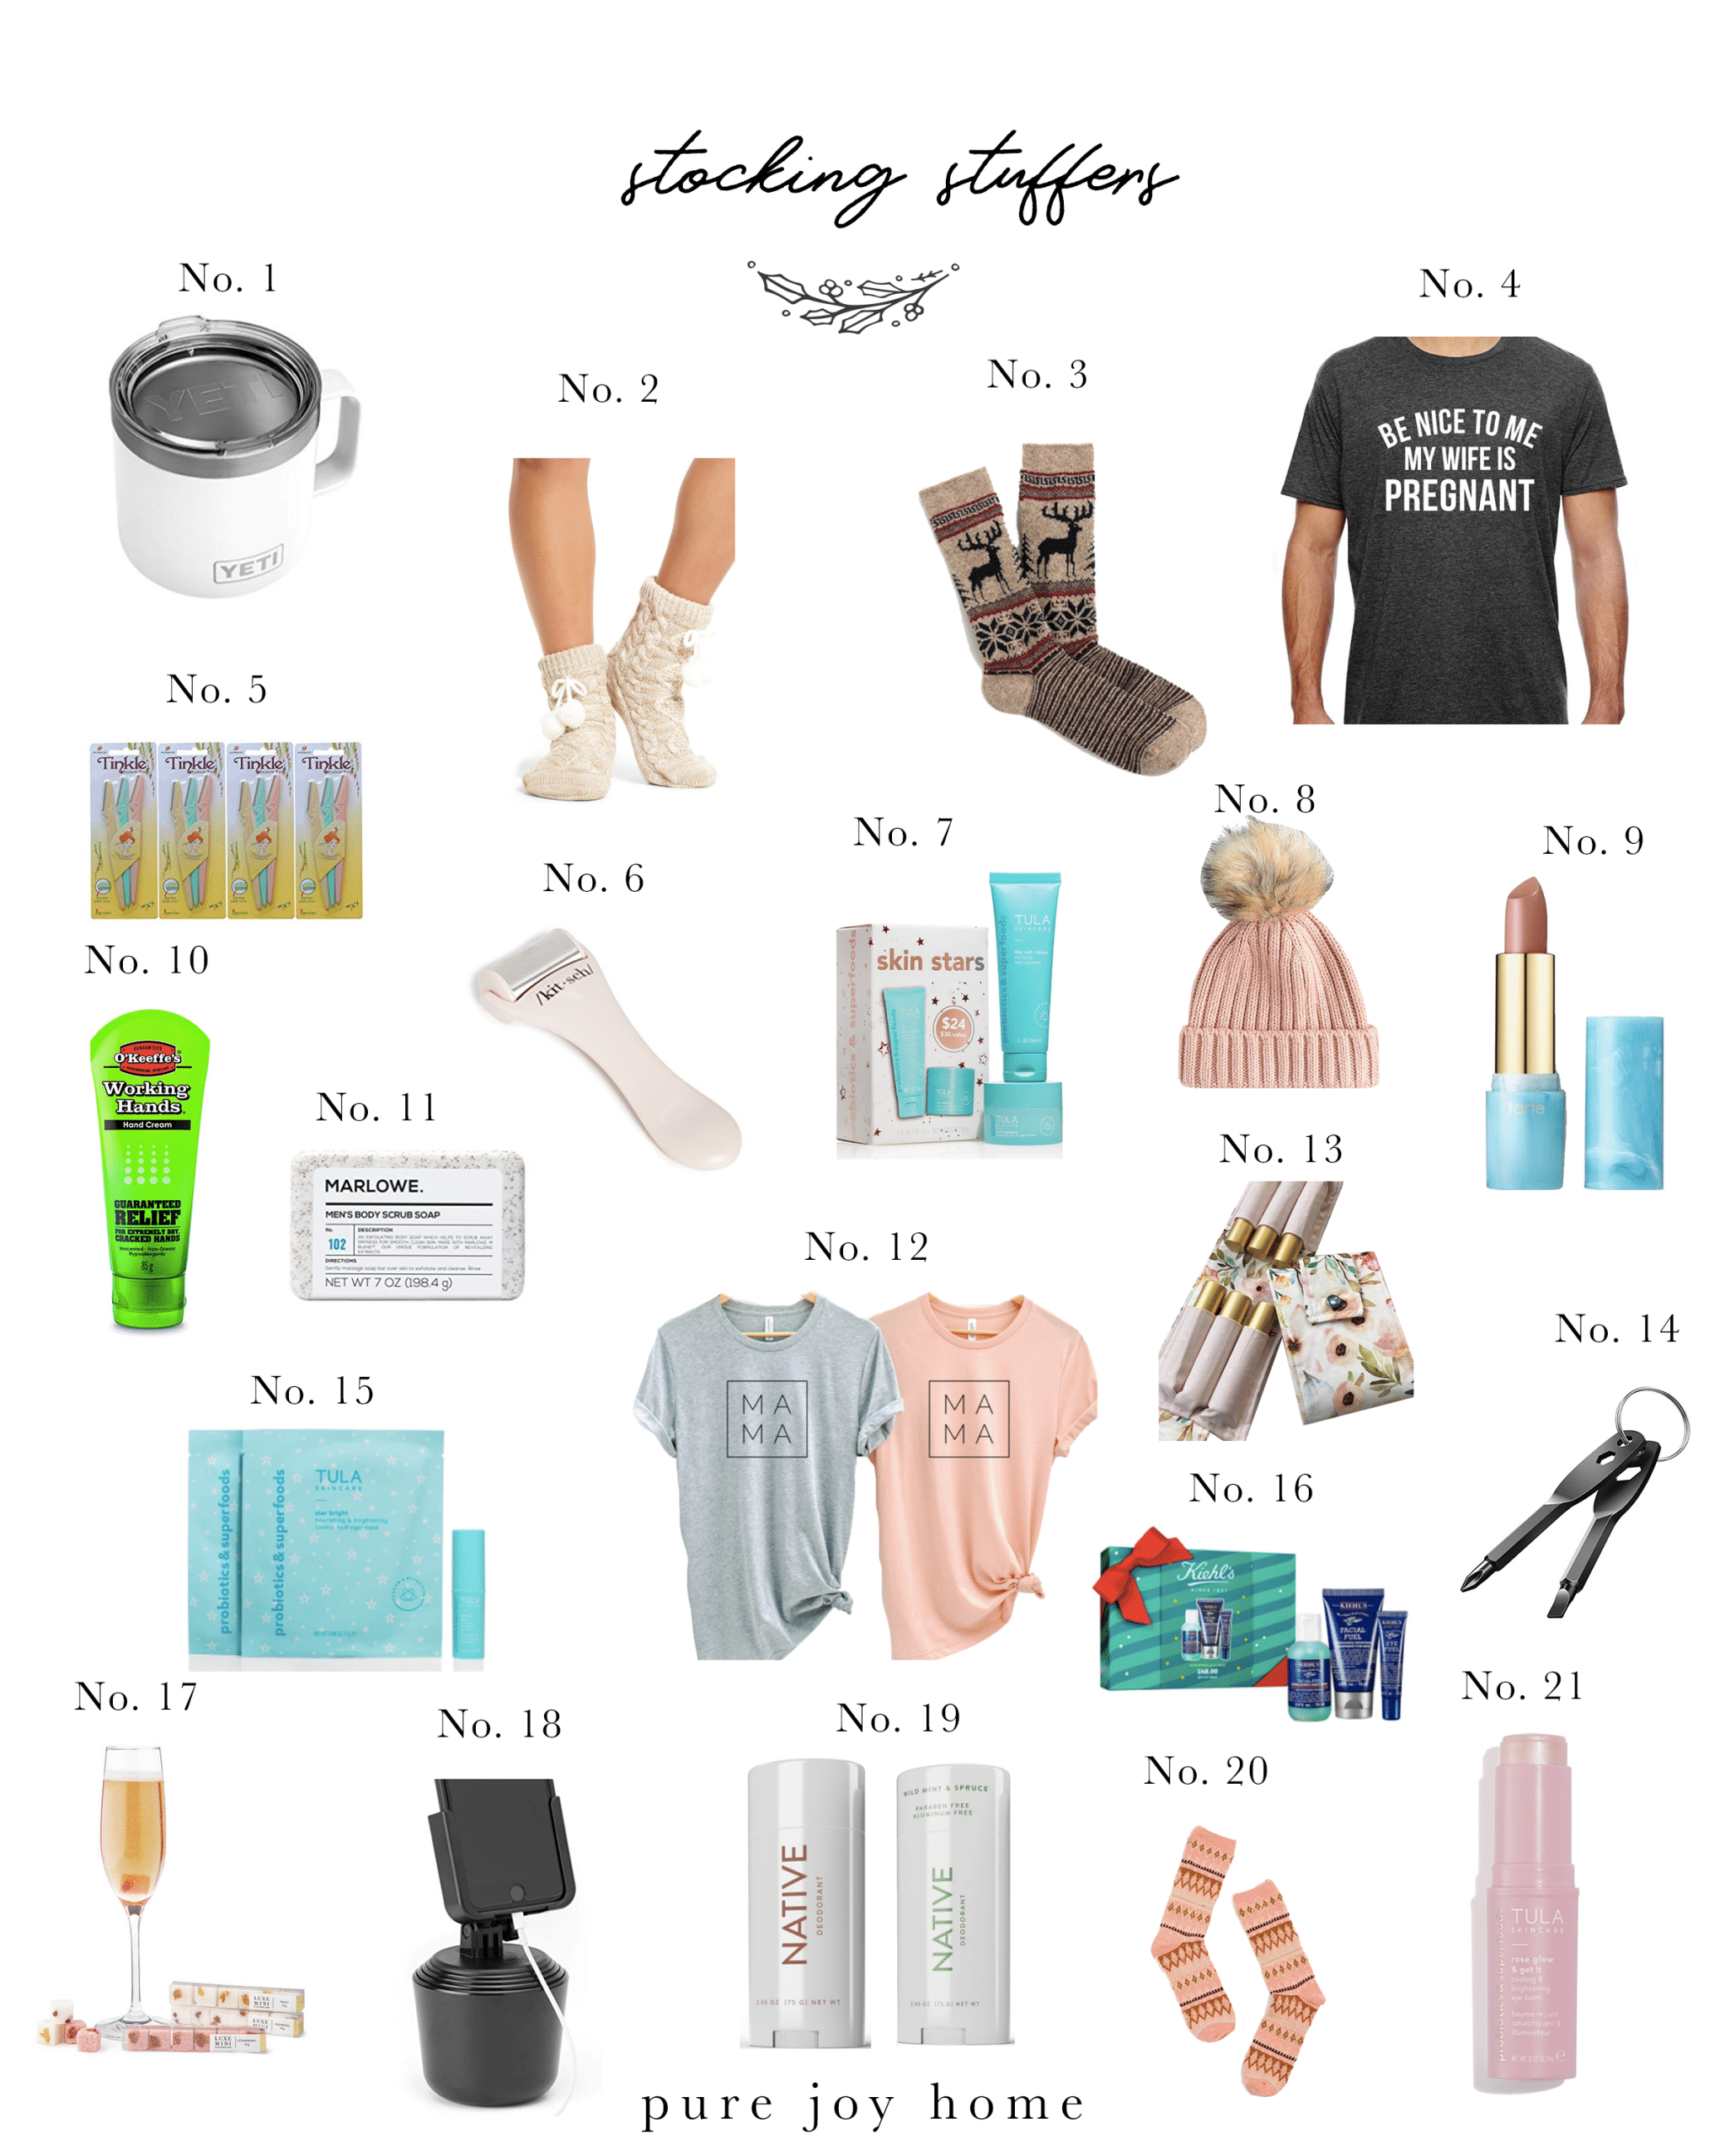 Best Stocking Stuffer Ideas for Wives & Husbands (Him & Her)